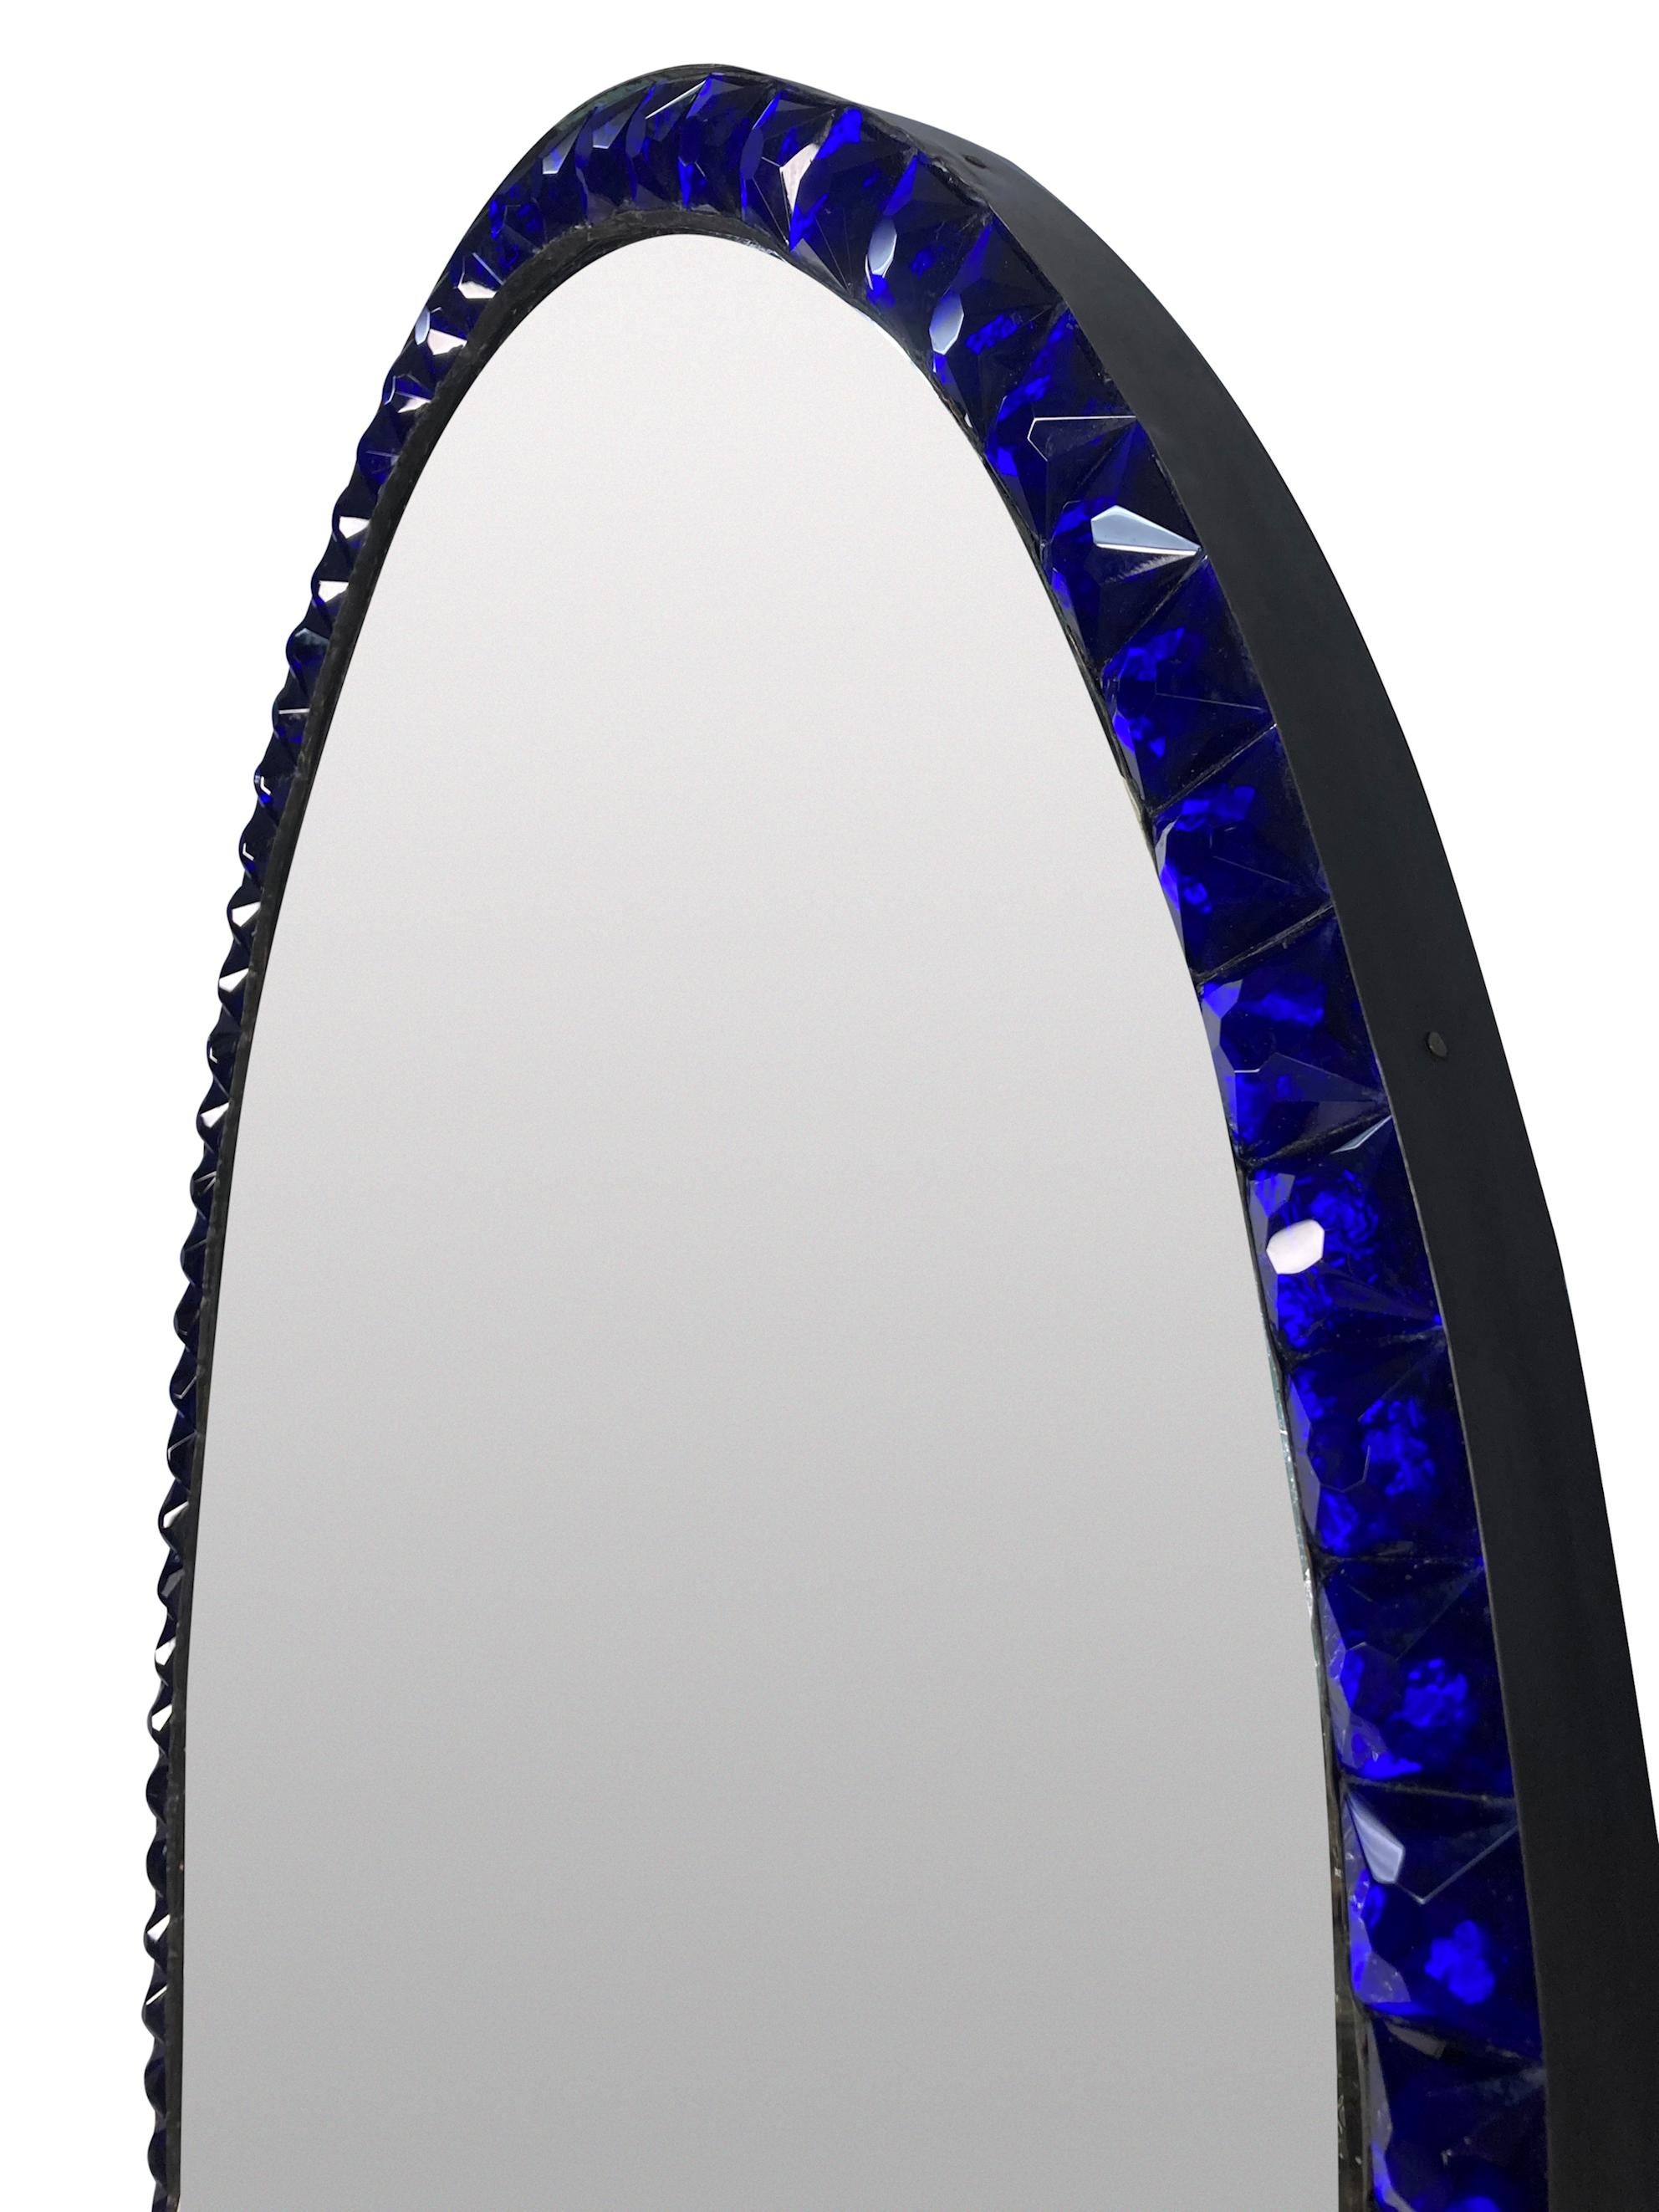 An Irish mirror in the George III style, of good quality with a faux mercury glass mirror plate pinned into a patinated copper frame, bordered with cobalt blue glass faceted studs in the traditional XVIII Century manner. Of good weight and with a